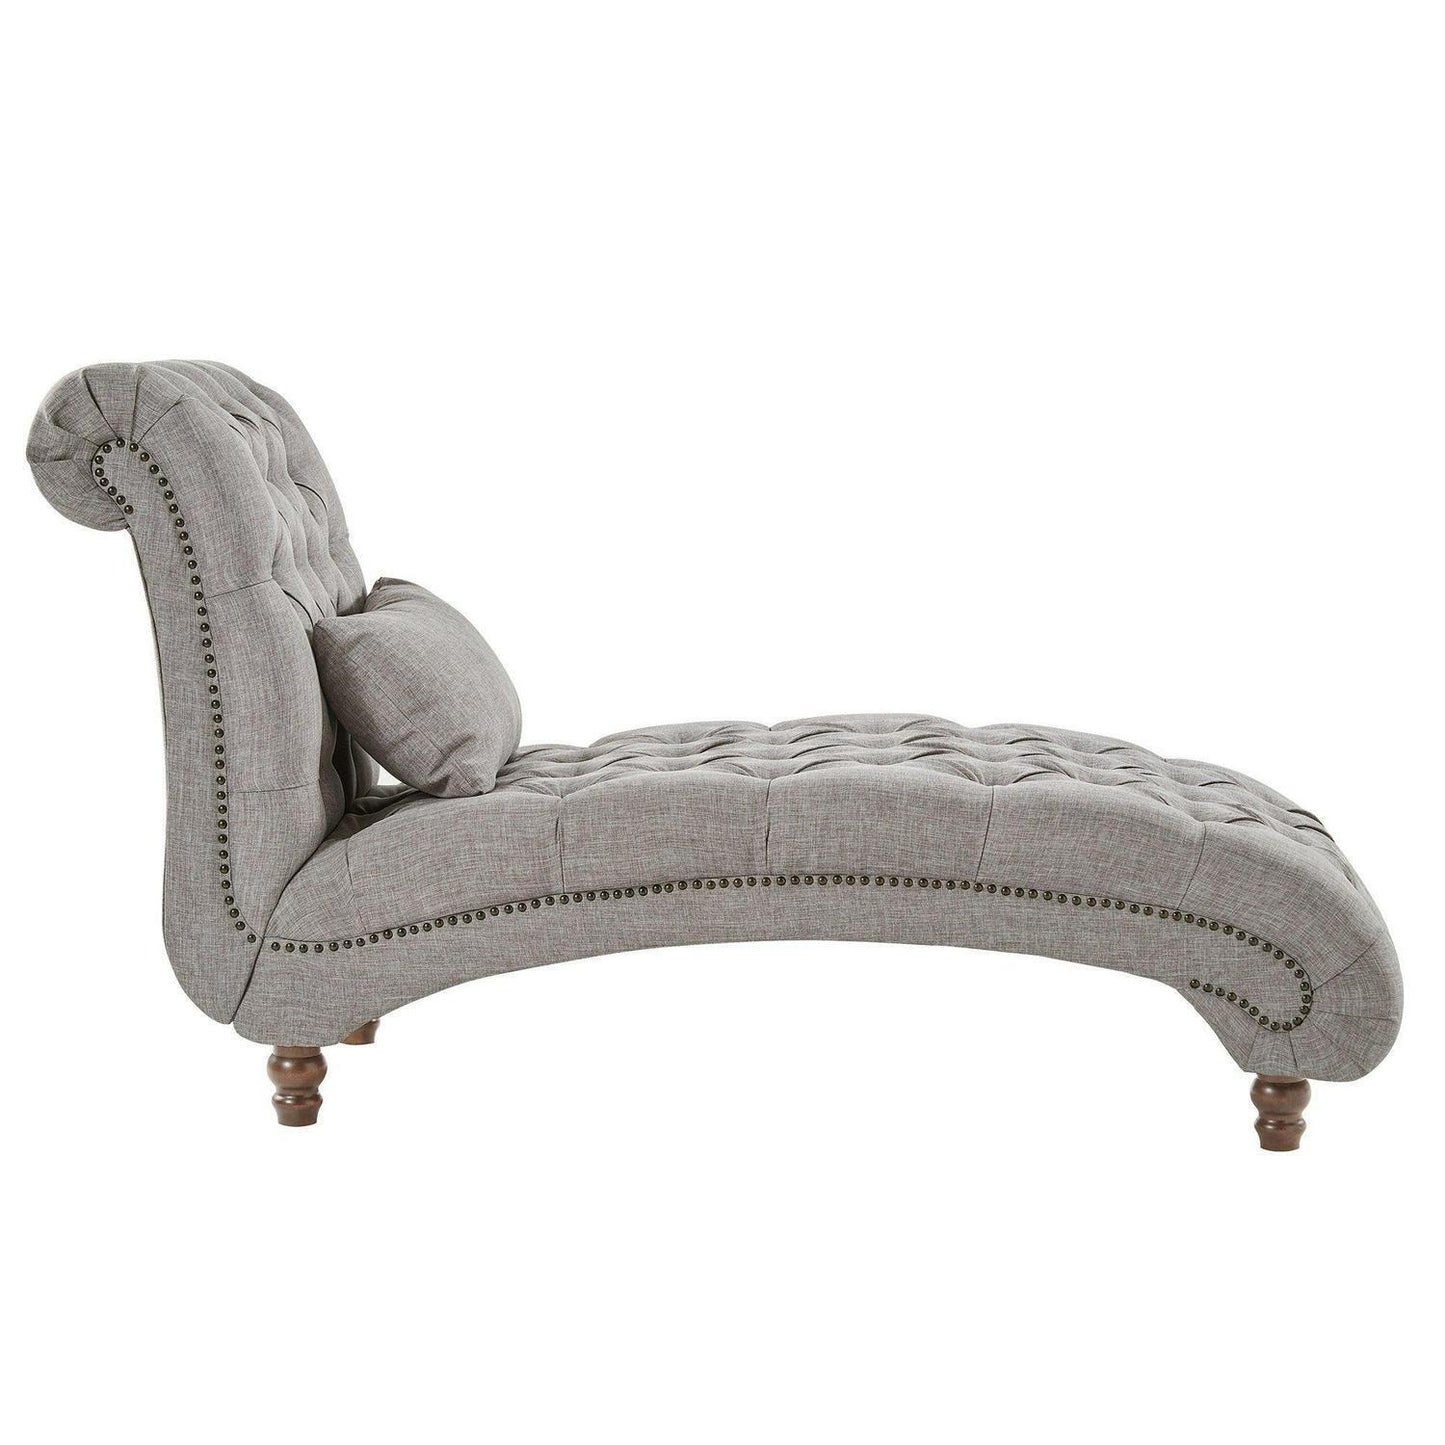 Oversized Chaise Lounge Chair Sofa w/Pillow Light Grey Linen Upholstered